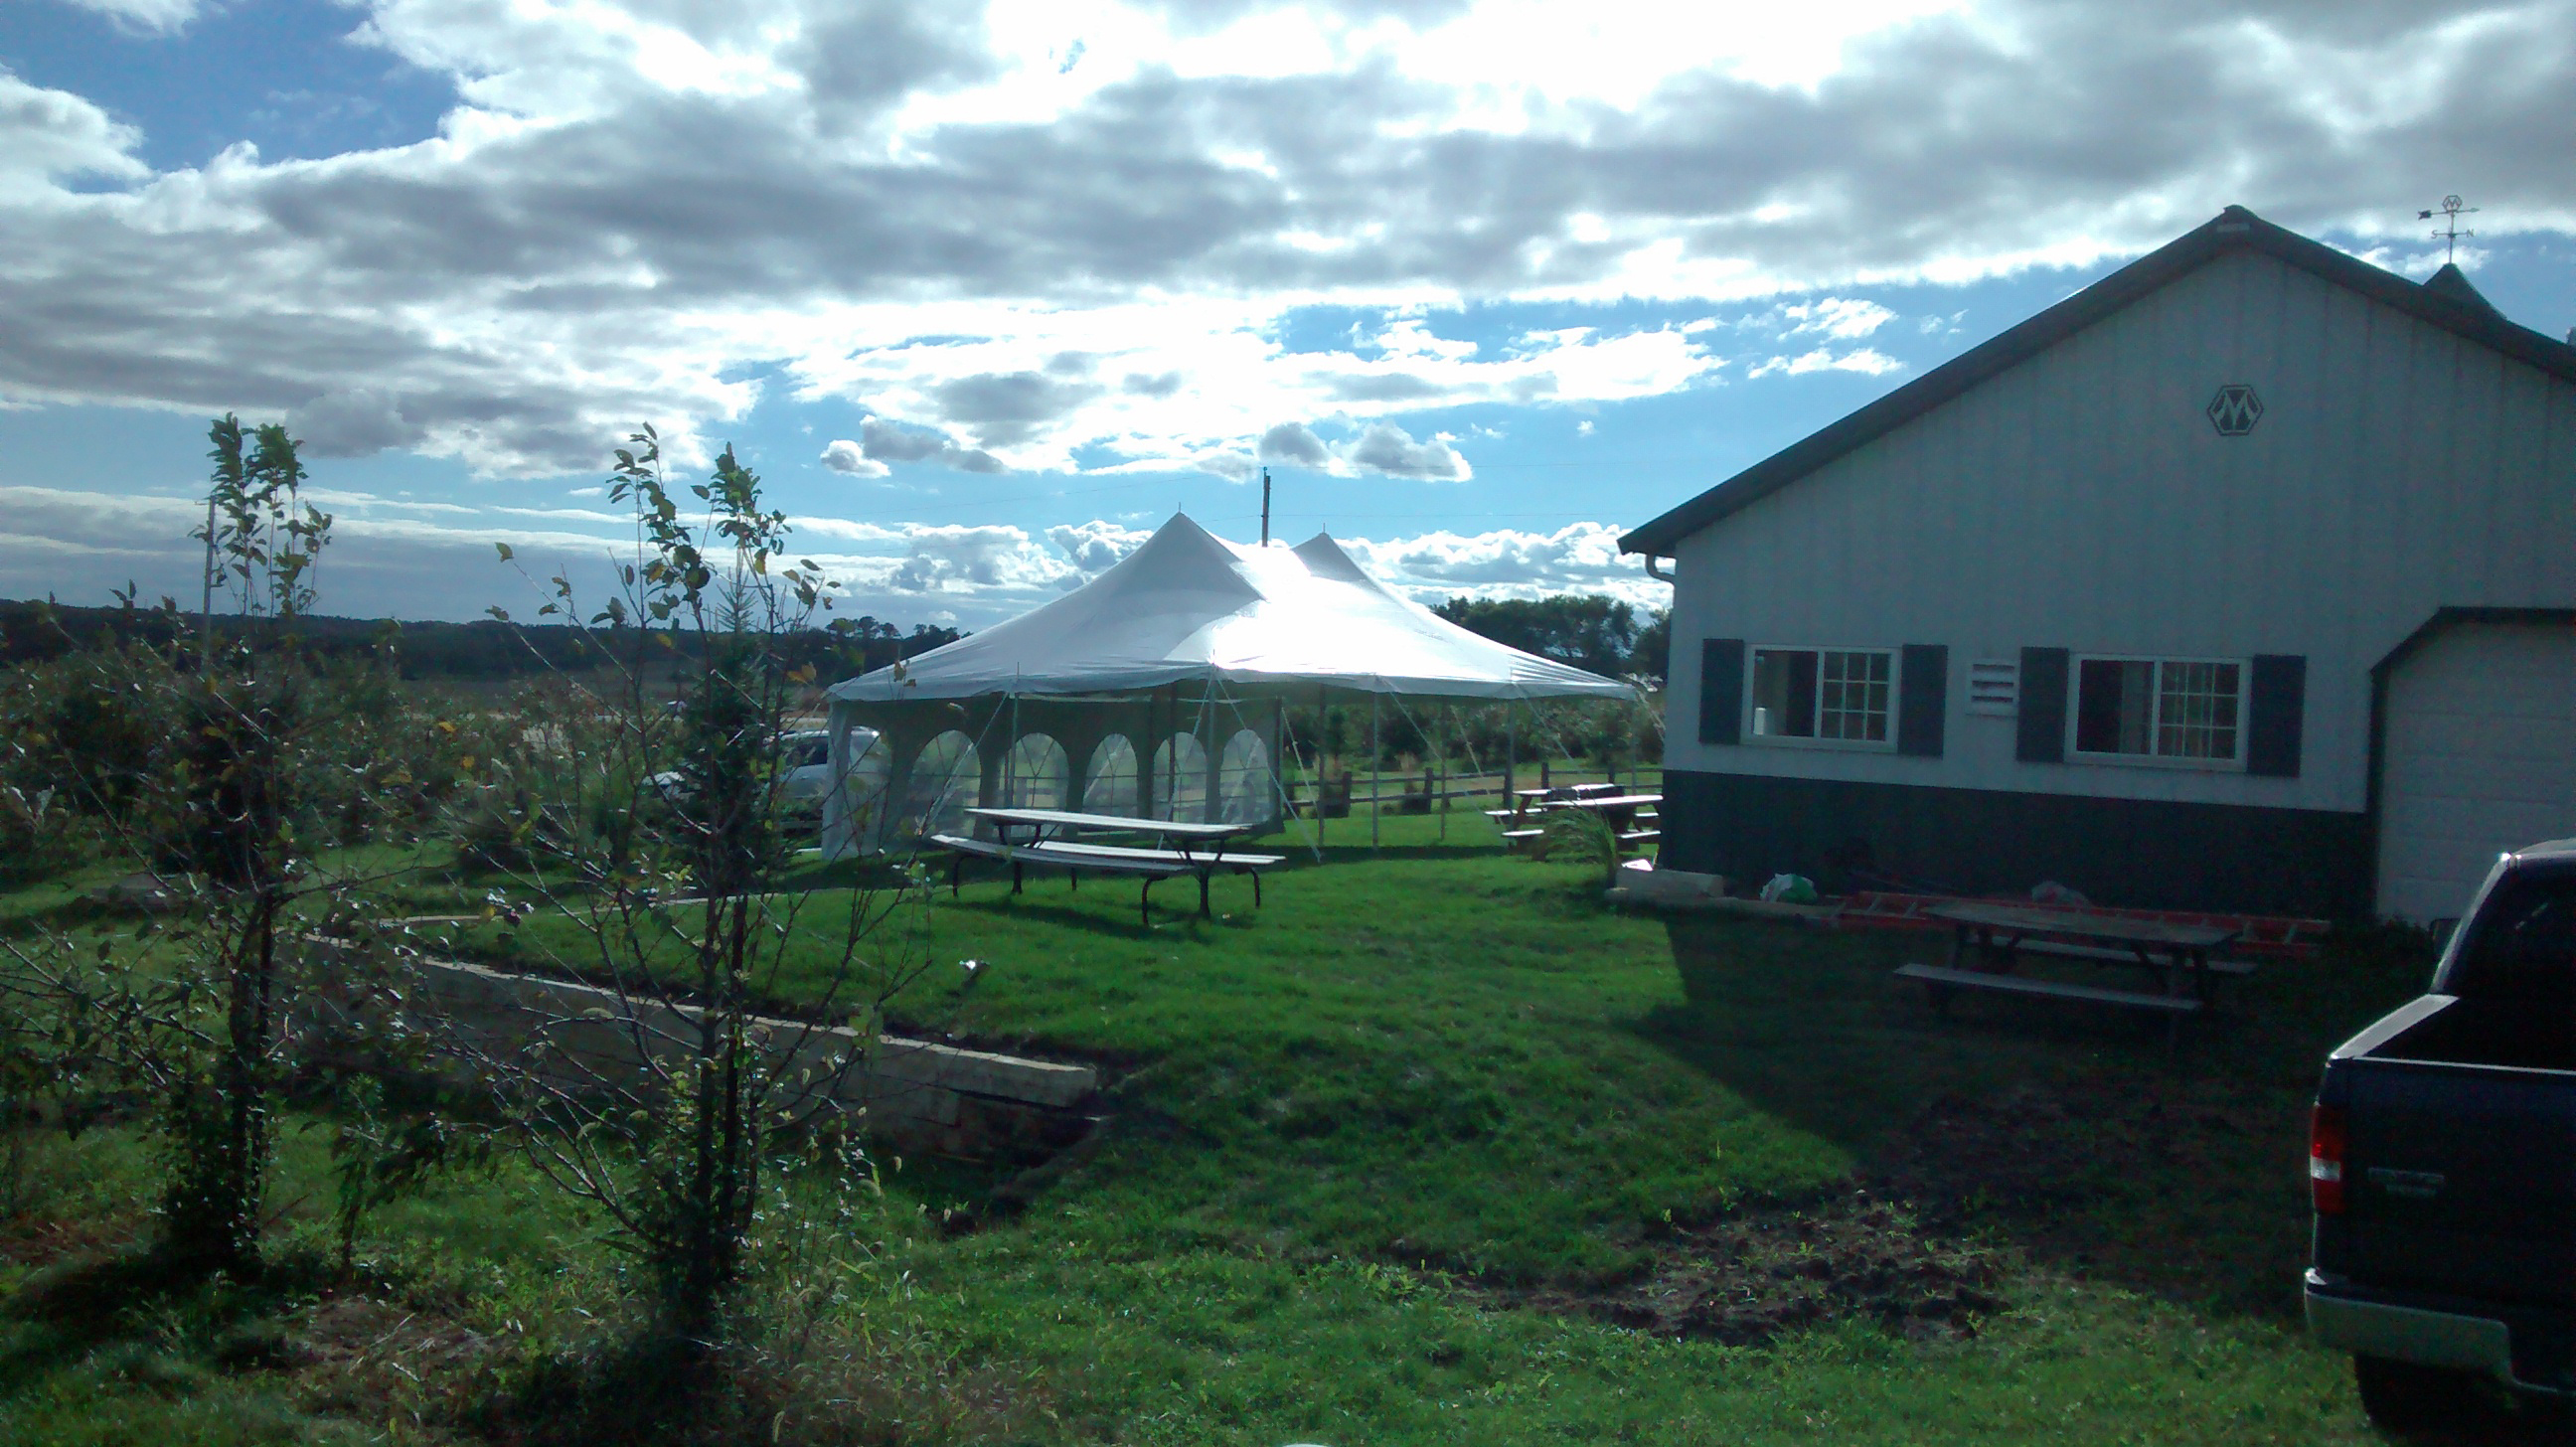 20' x 30' rope and pole tent with French window sidewalls at The Big Apple Orchard Mt Vernon, IA